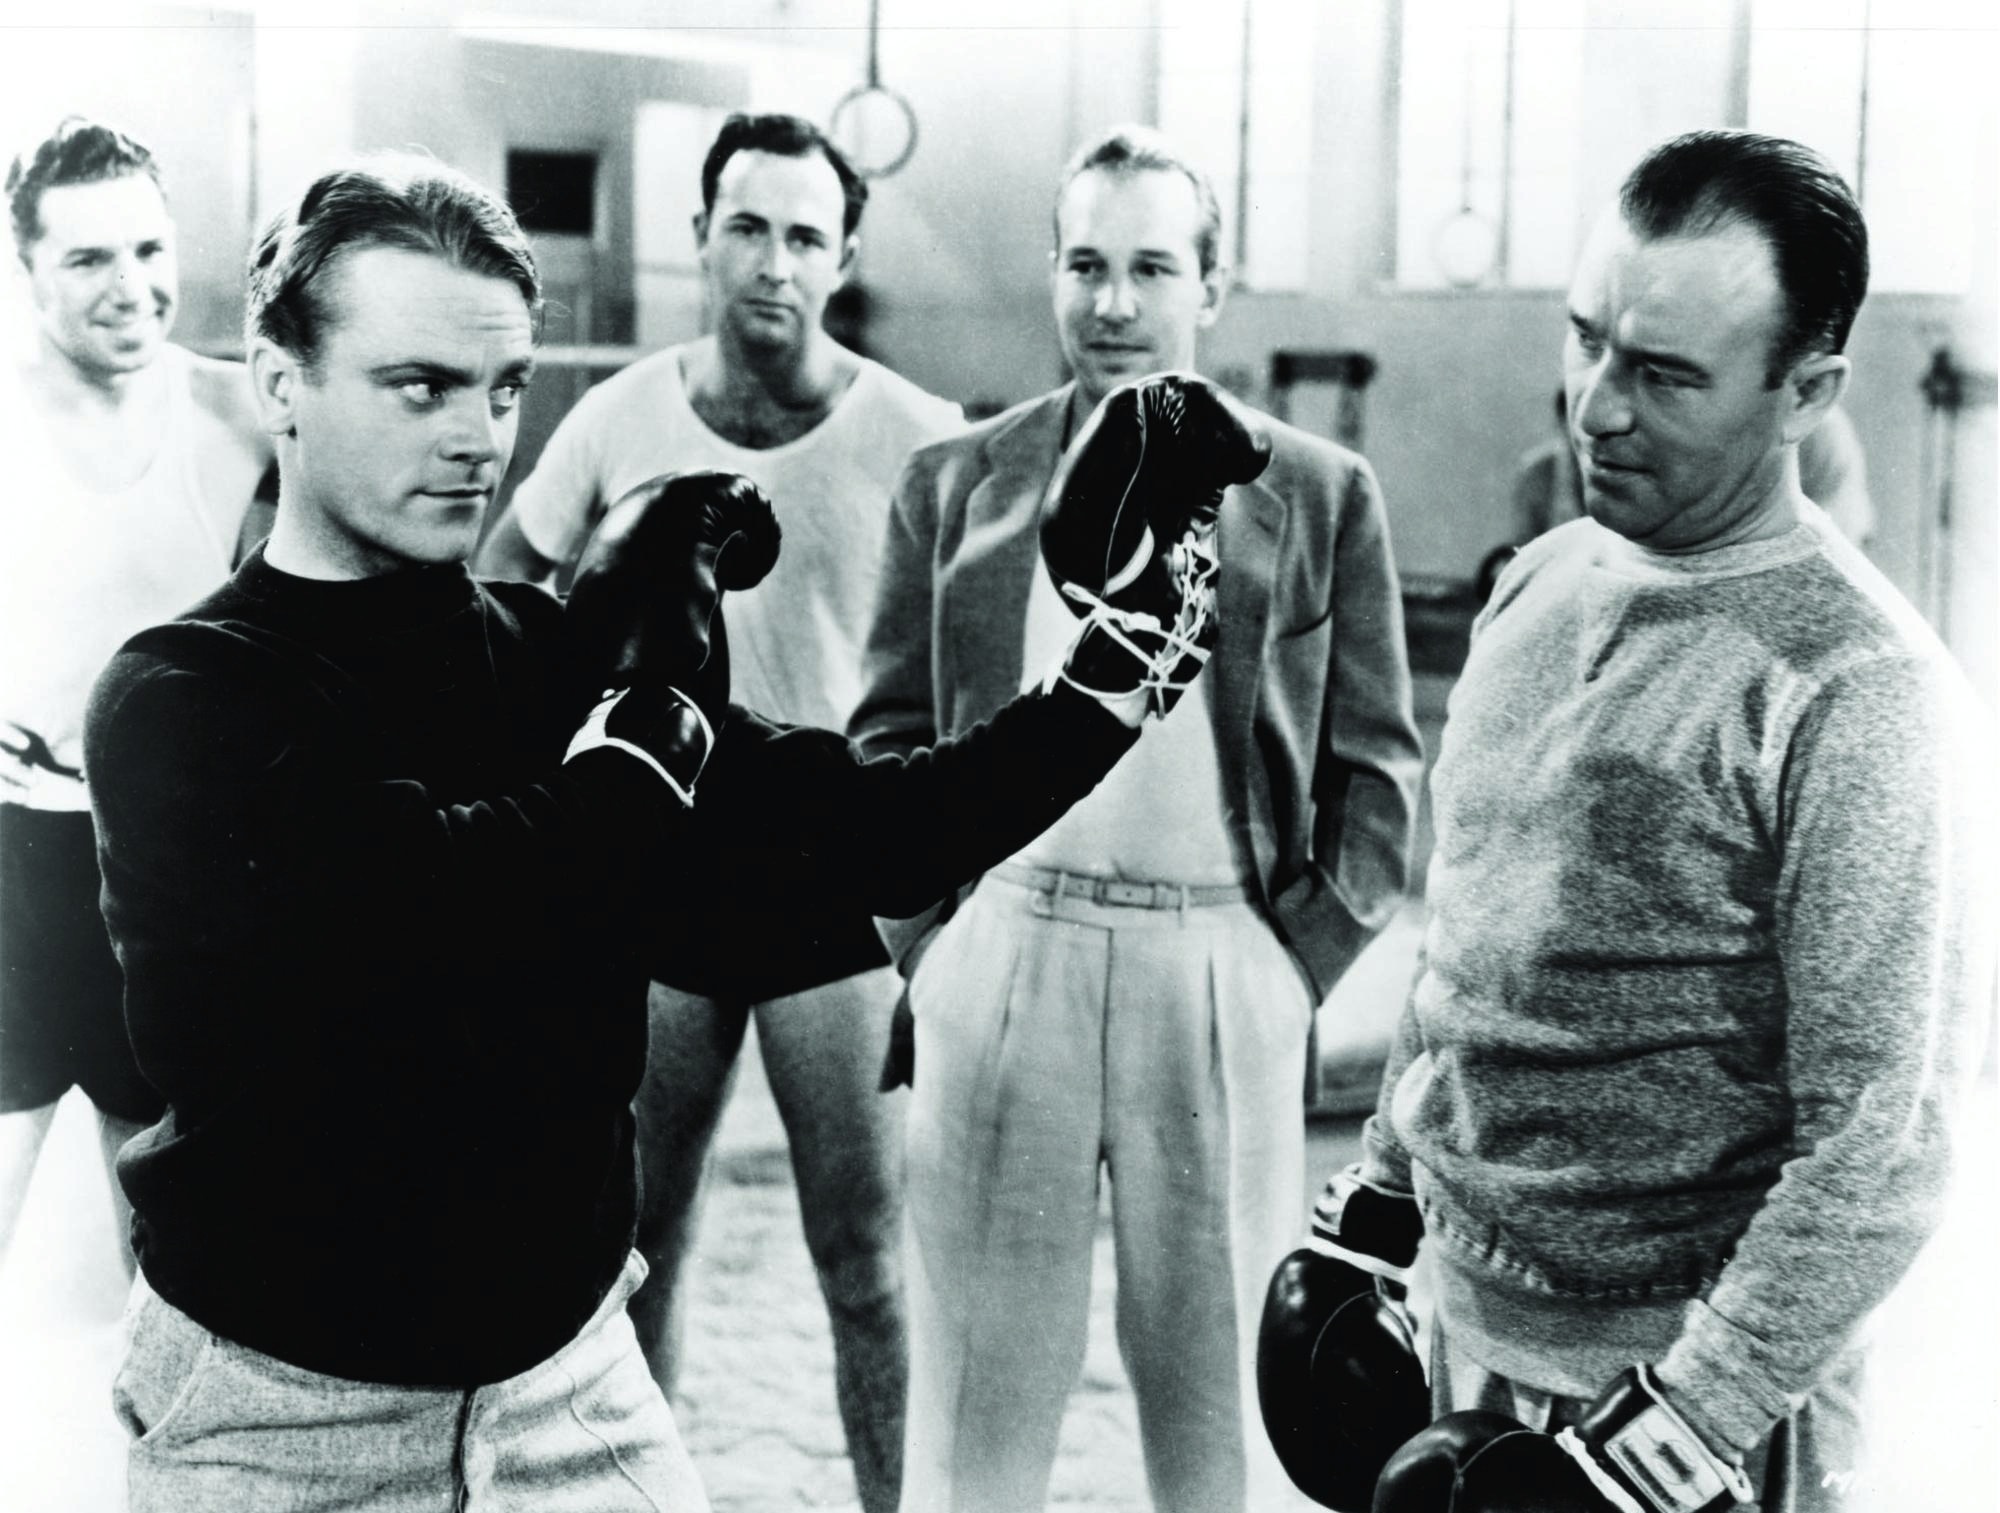 Still of James Cagney, Robert Armstrong and Lloyd Nolan in 'G' Men (1935)